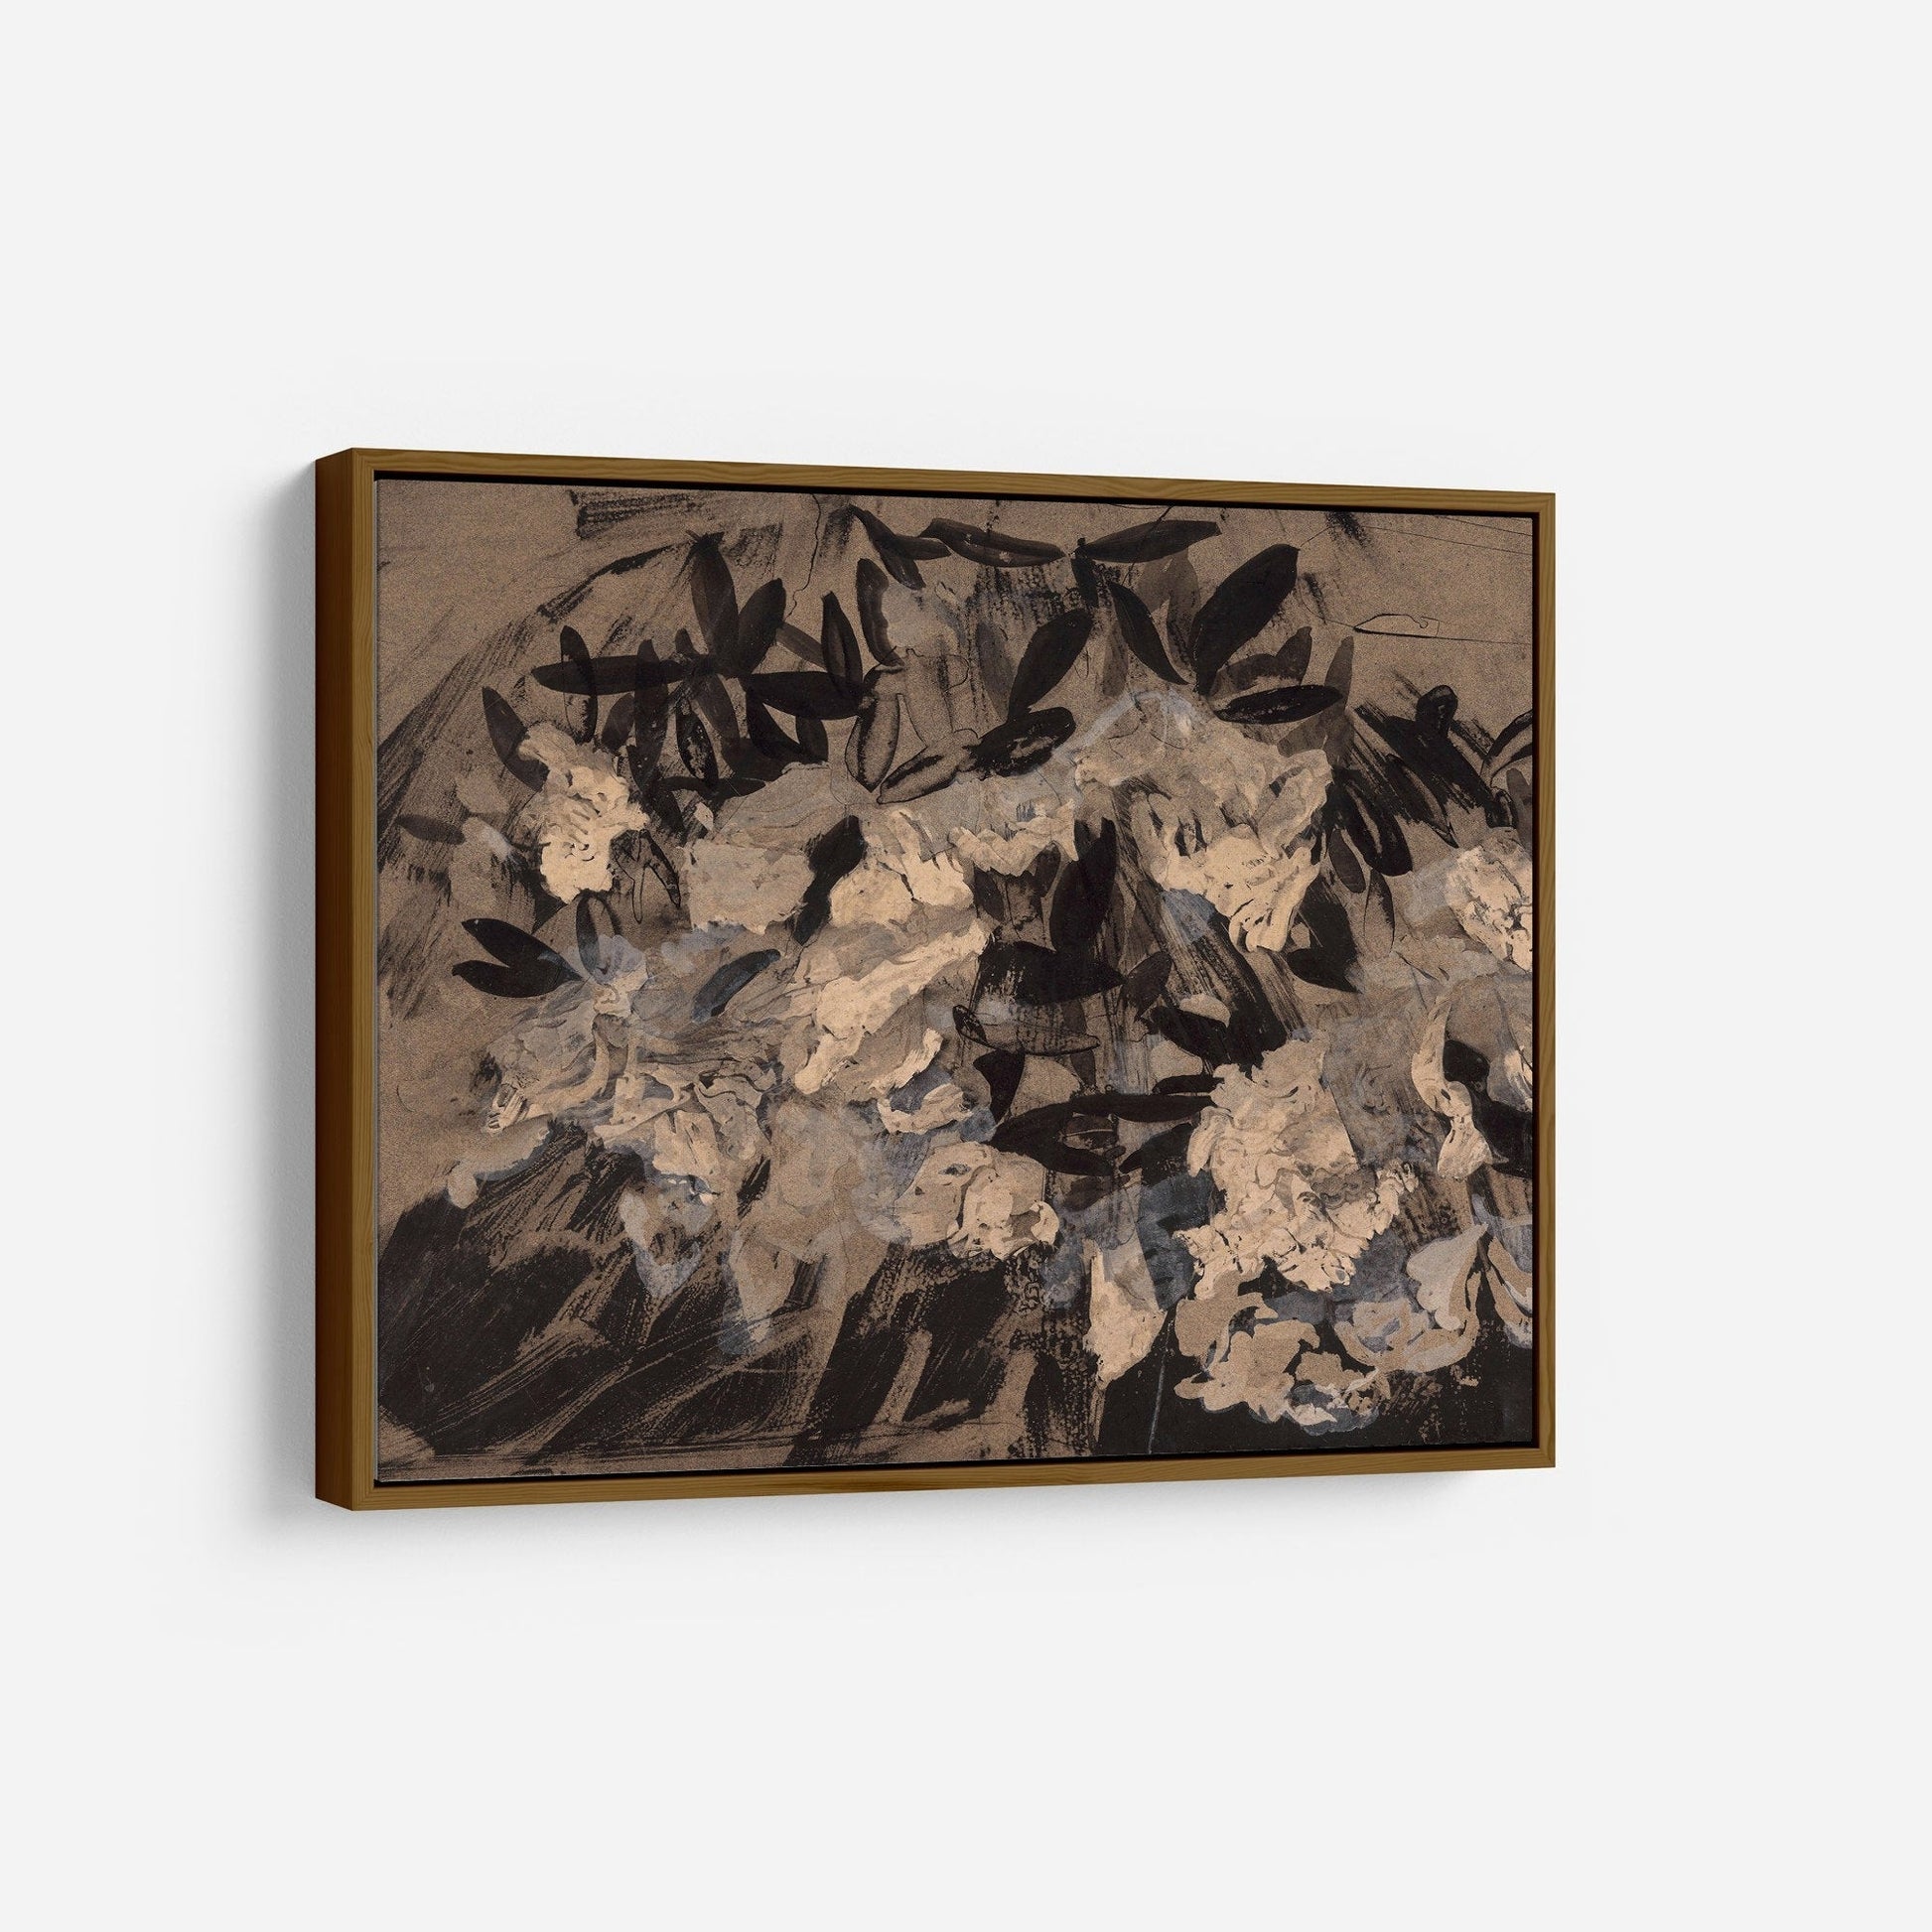 Flowers 2 Vintage Floral Wall Art - Dark Floral Bedroom Wall Print Poster - Printed and Shipped Reproduction - Oversize prints